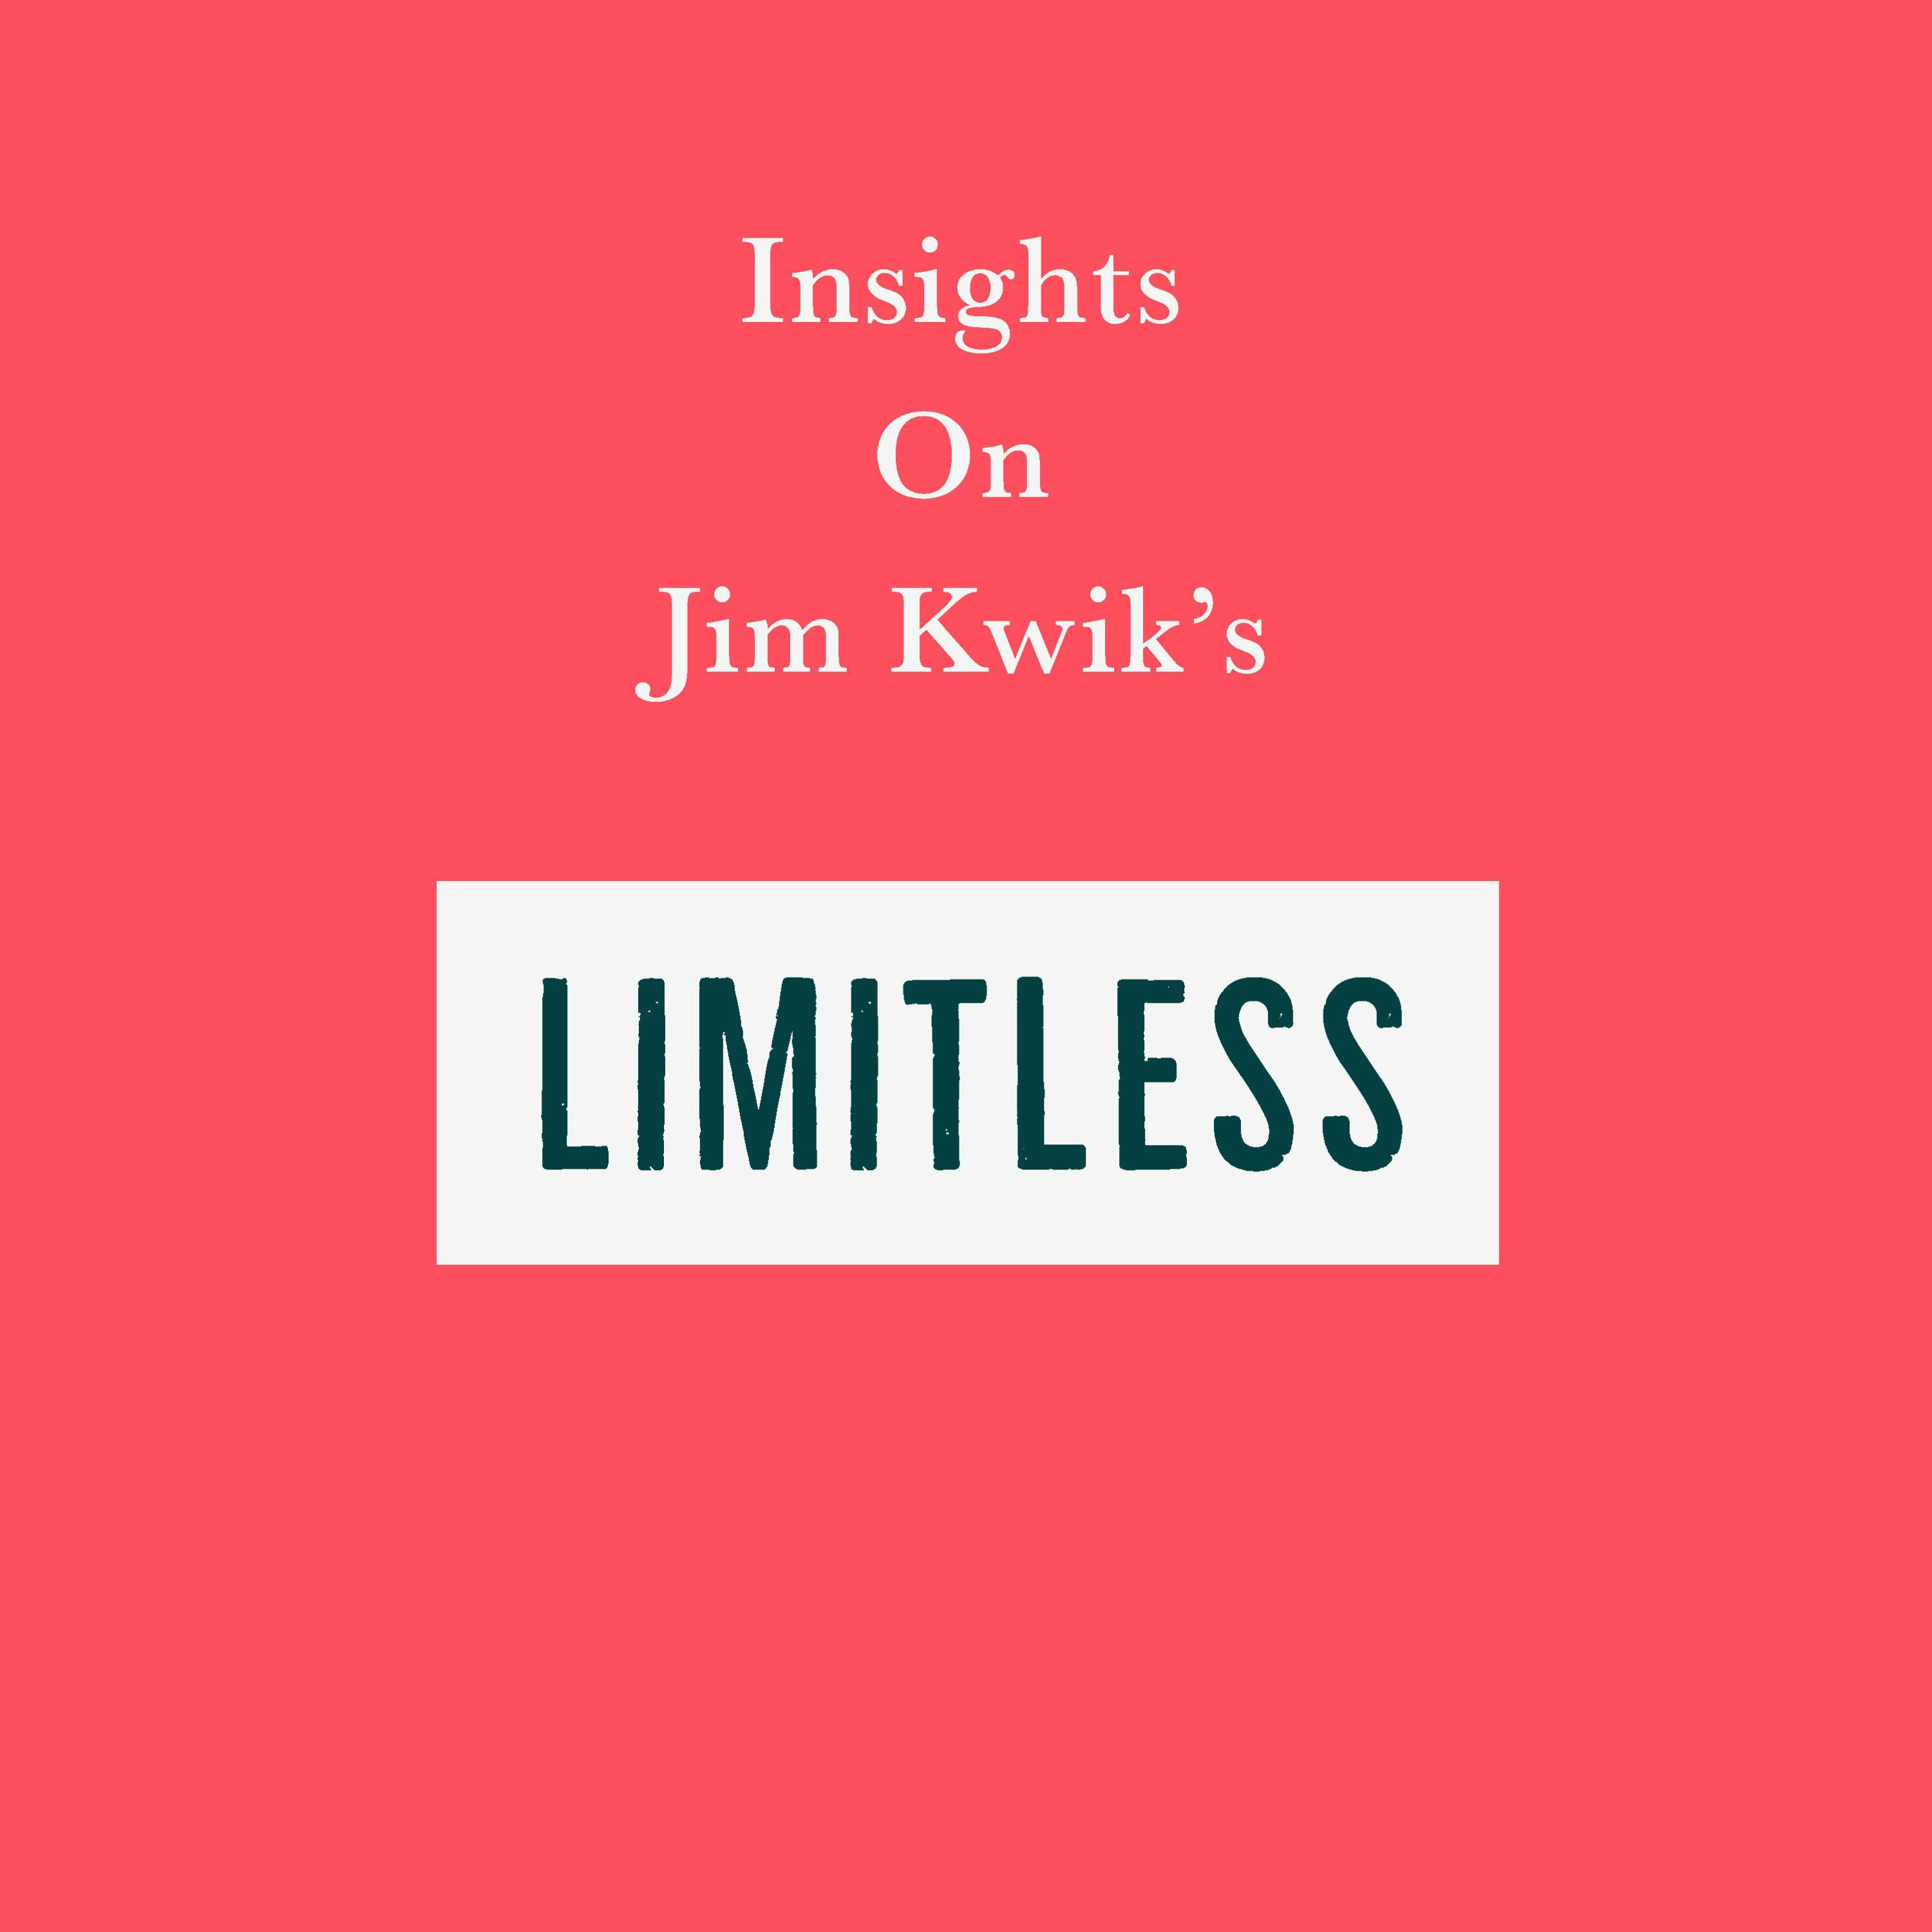 Insights on Jim Kwik’s Limitless - undefined